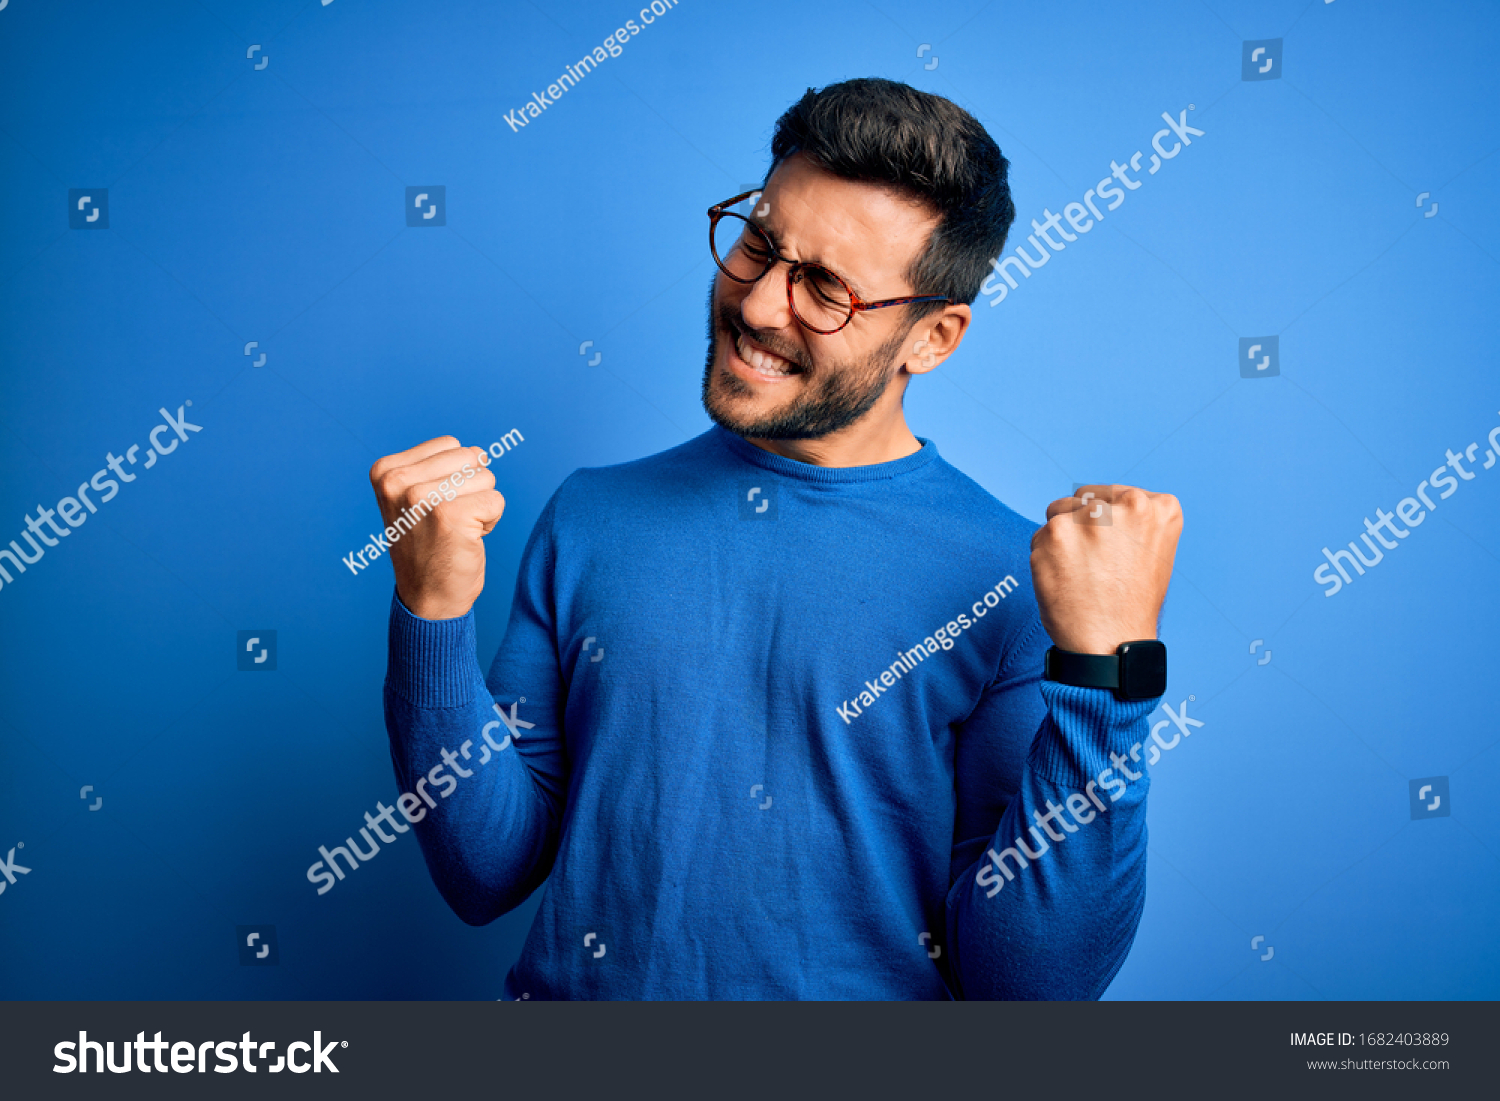 Young handsome man with beard wearing casual sweater and glasses over blue background very happy and excited doing winner gesture with arms raised, smiling and screaming for success. Celebration #1682403889